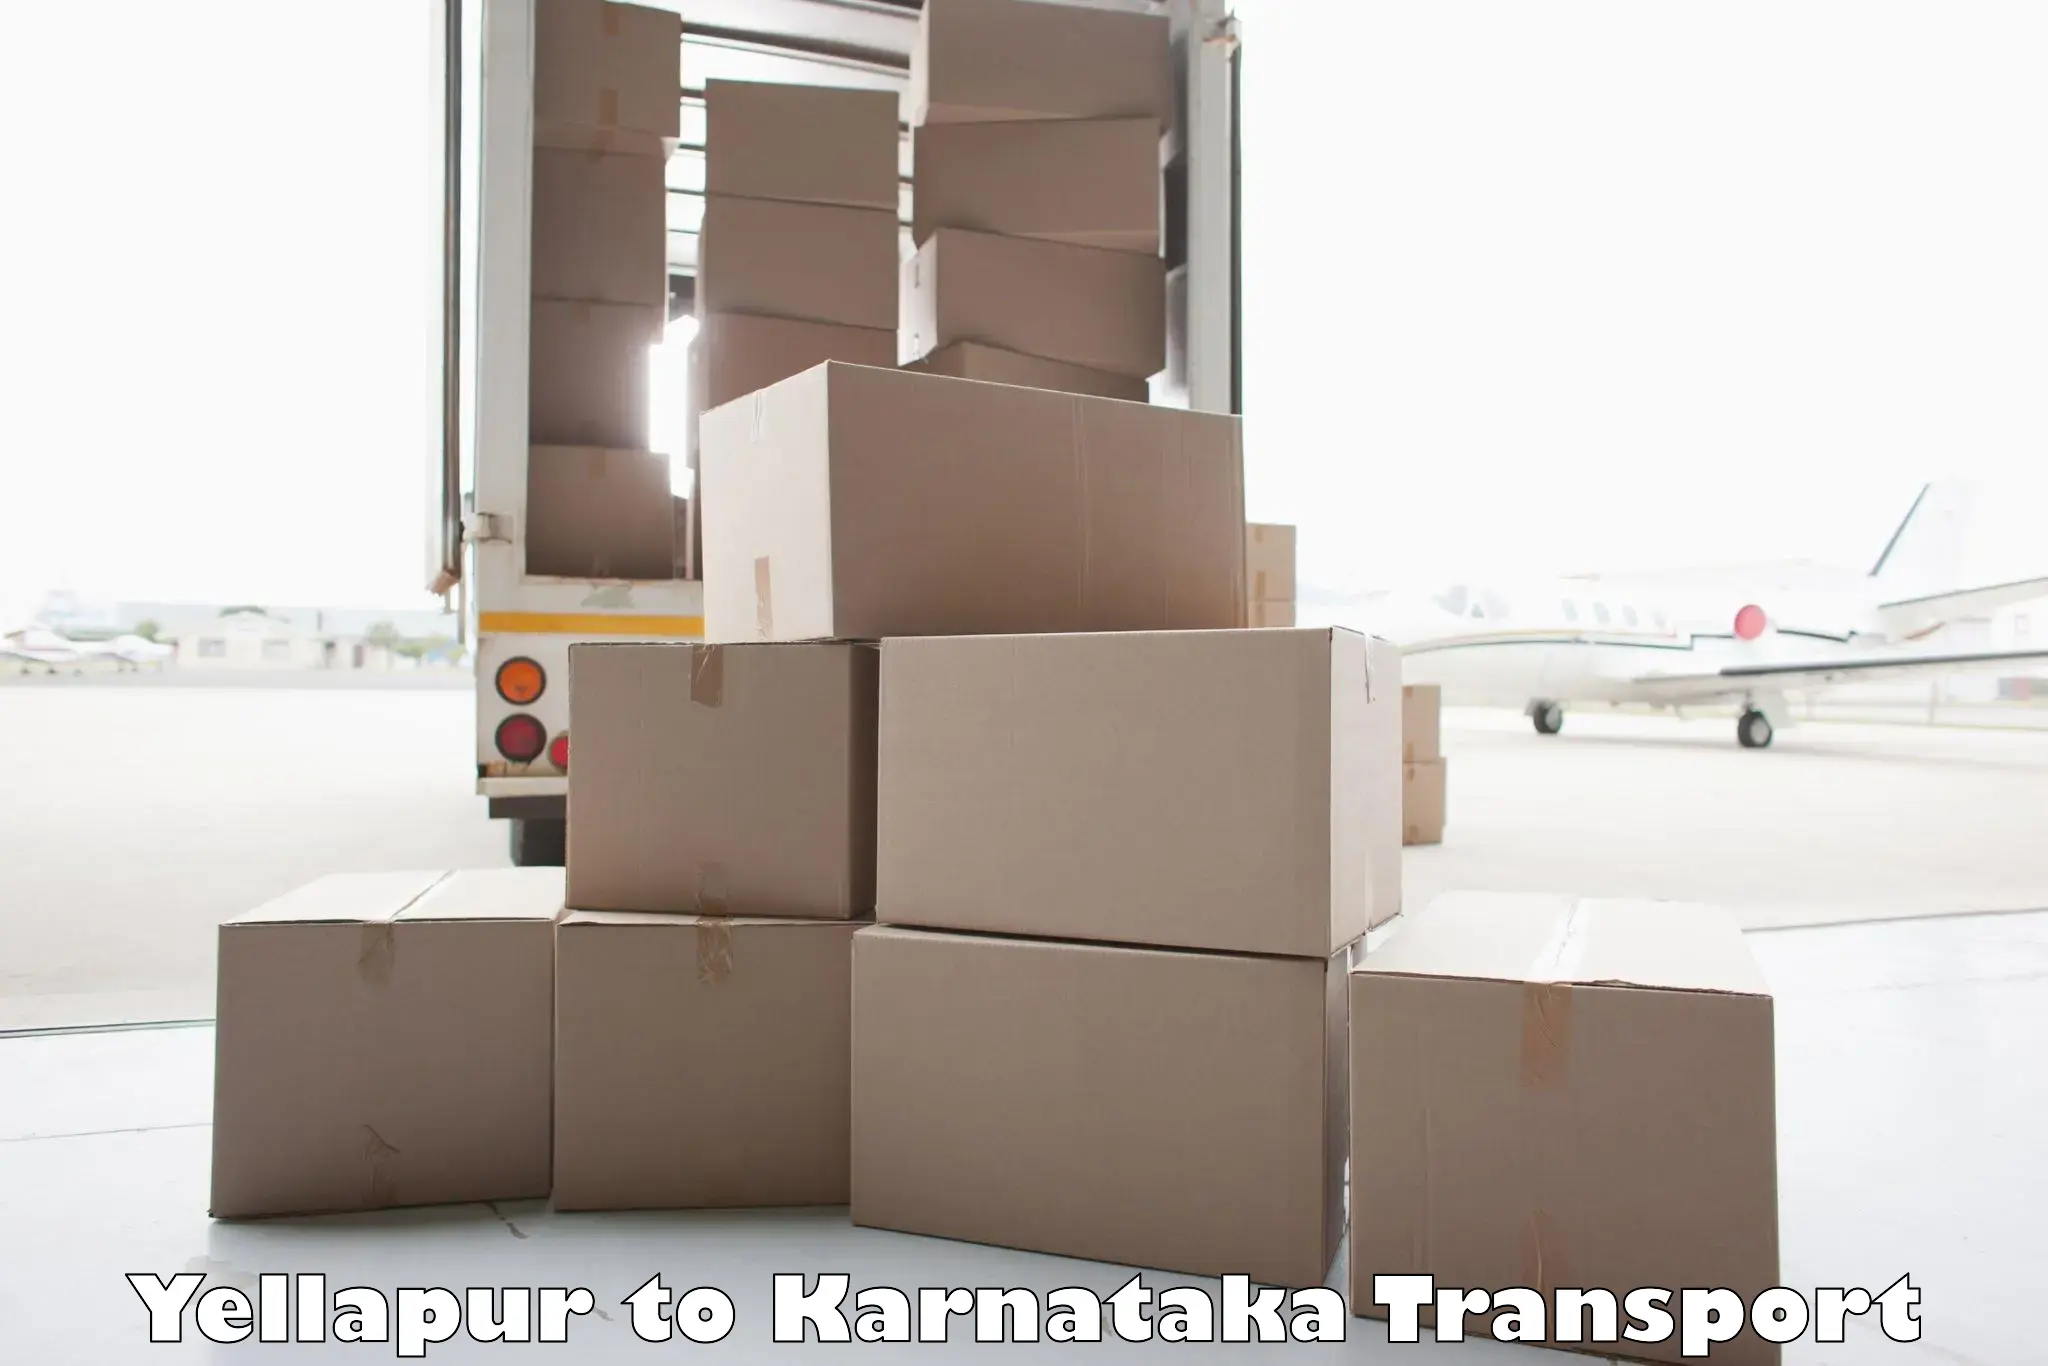 Vehicle transport services Yellapur to Challakere